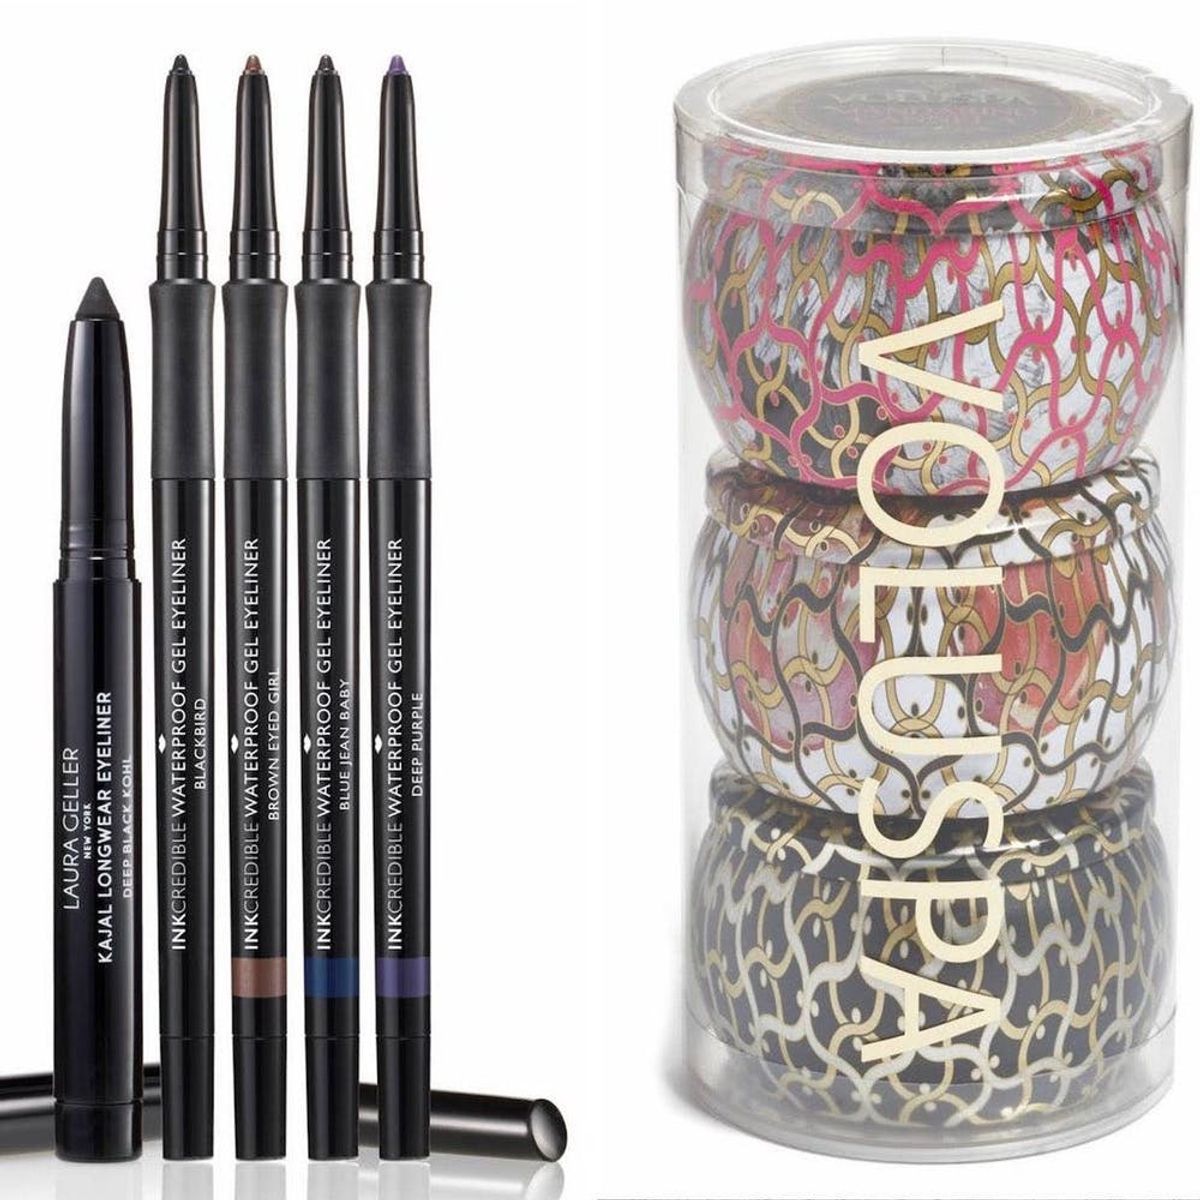 14 of Our Top Beauty Buys from the Nordstrom Anniversary Sale